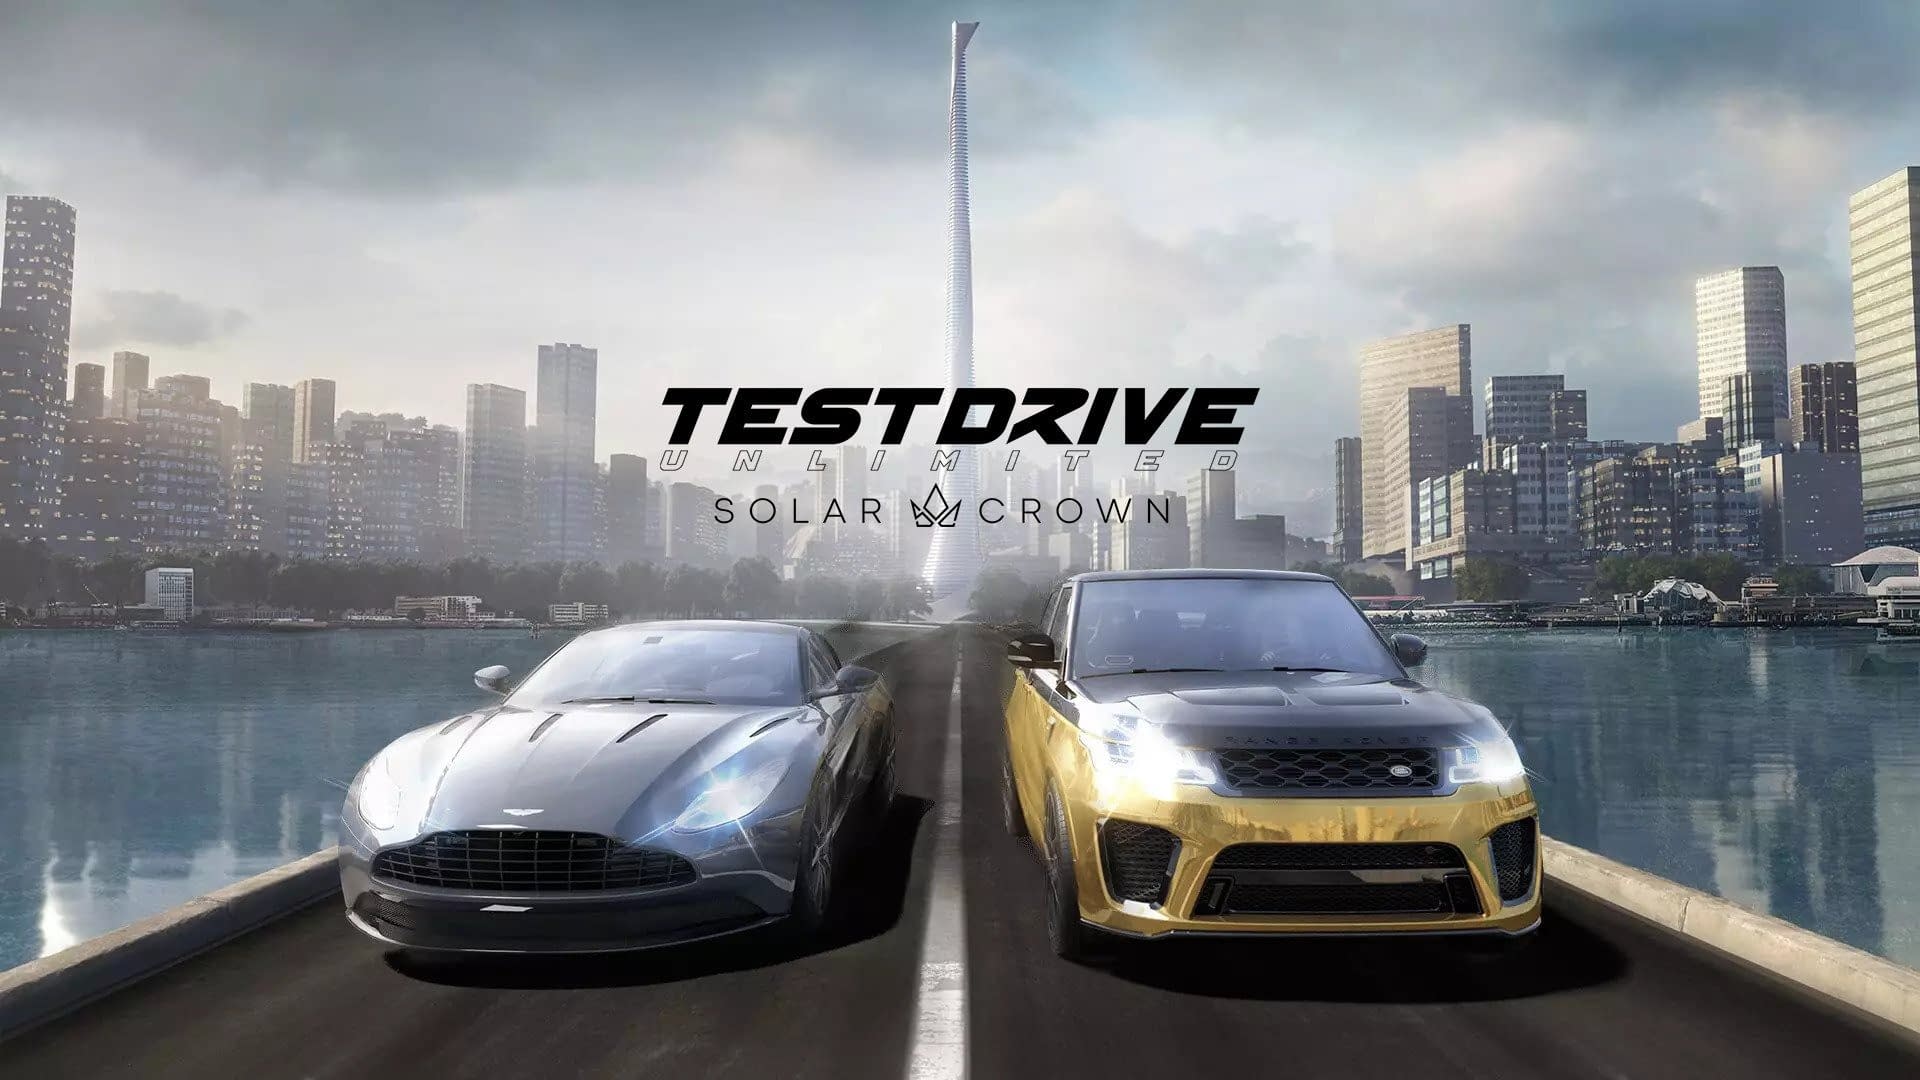 New Details for Test Drive Unlimited Solar Crown Coming Soon